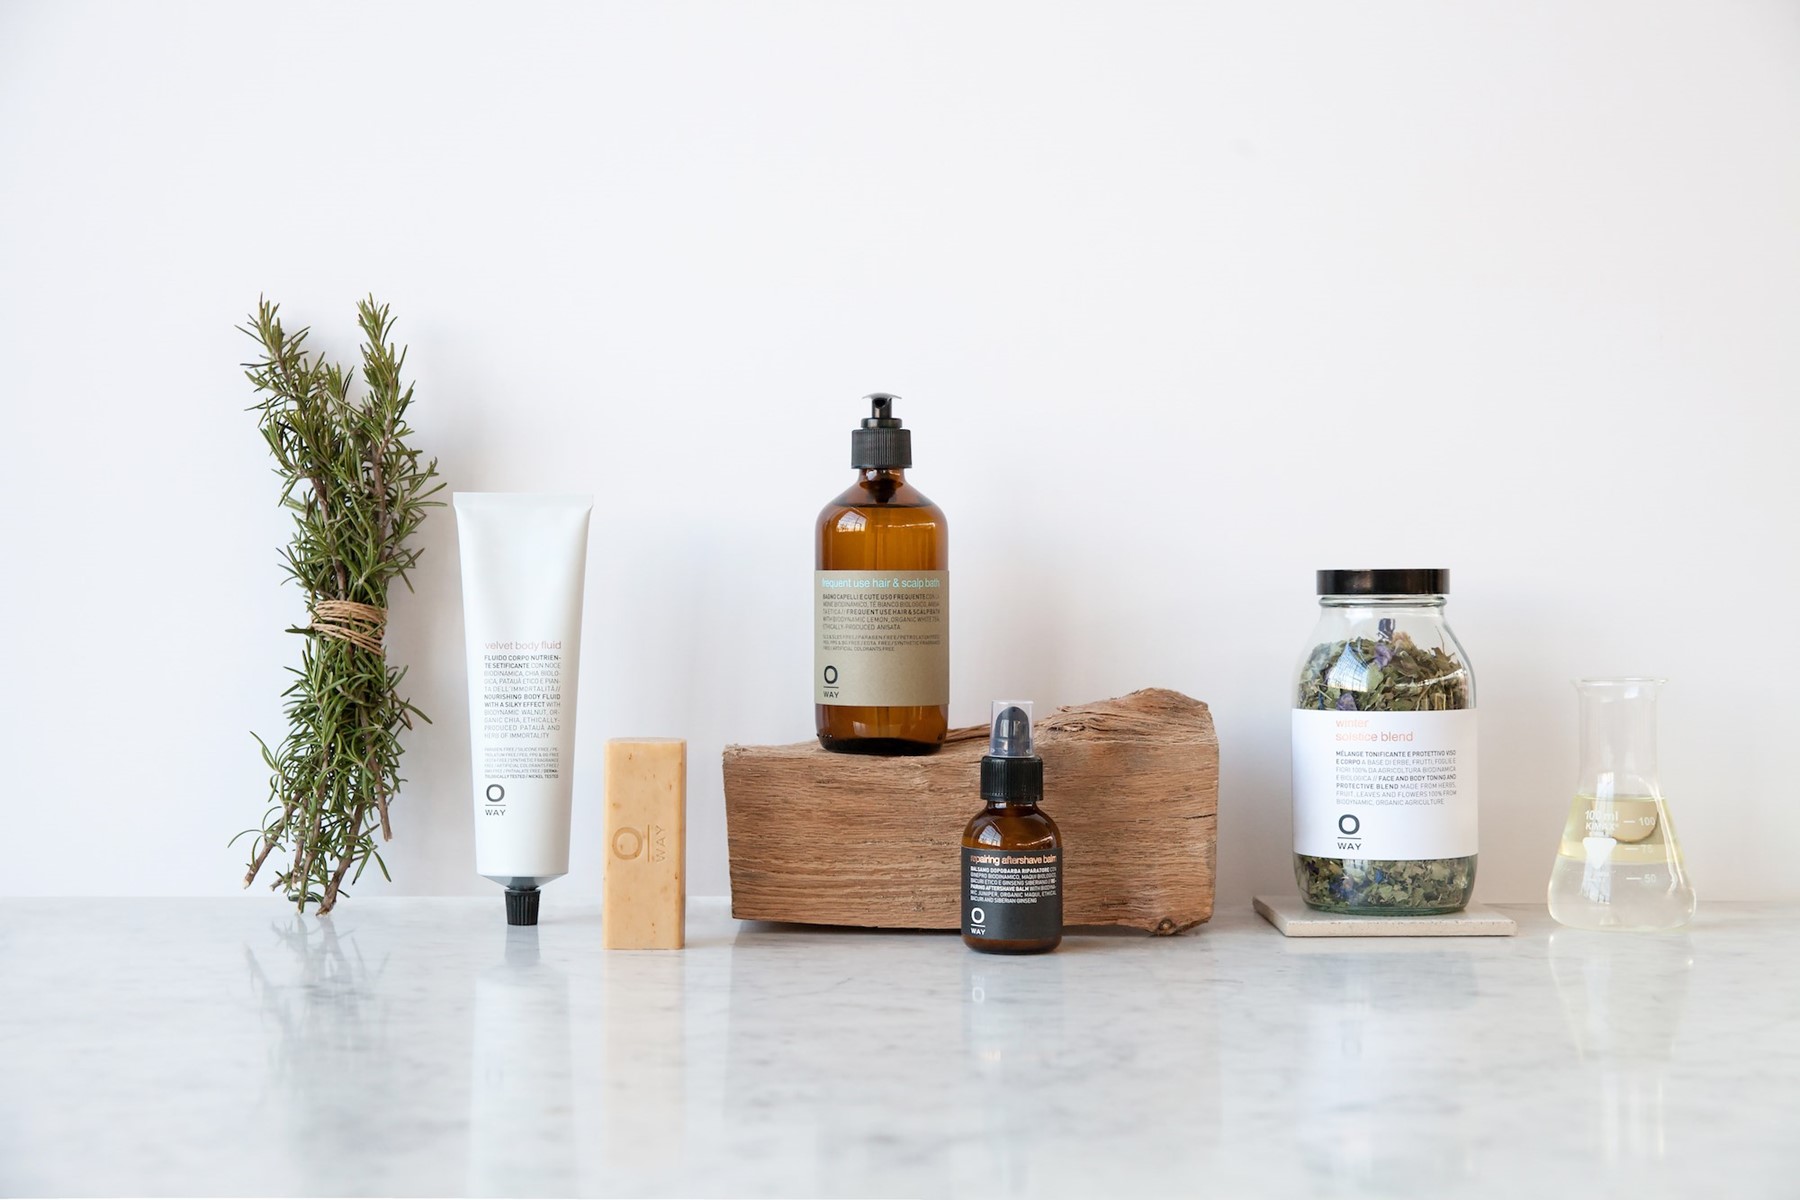 Zogenaamd lof Persoonlijk If you care about the planet, you need to know about haircare brand Oway |  Dazed